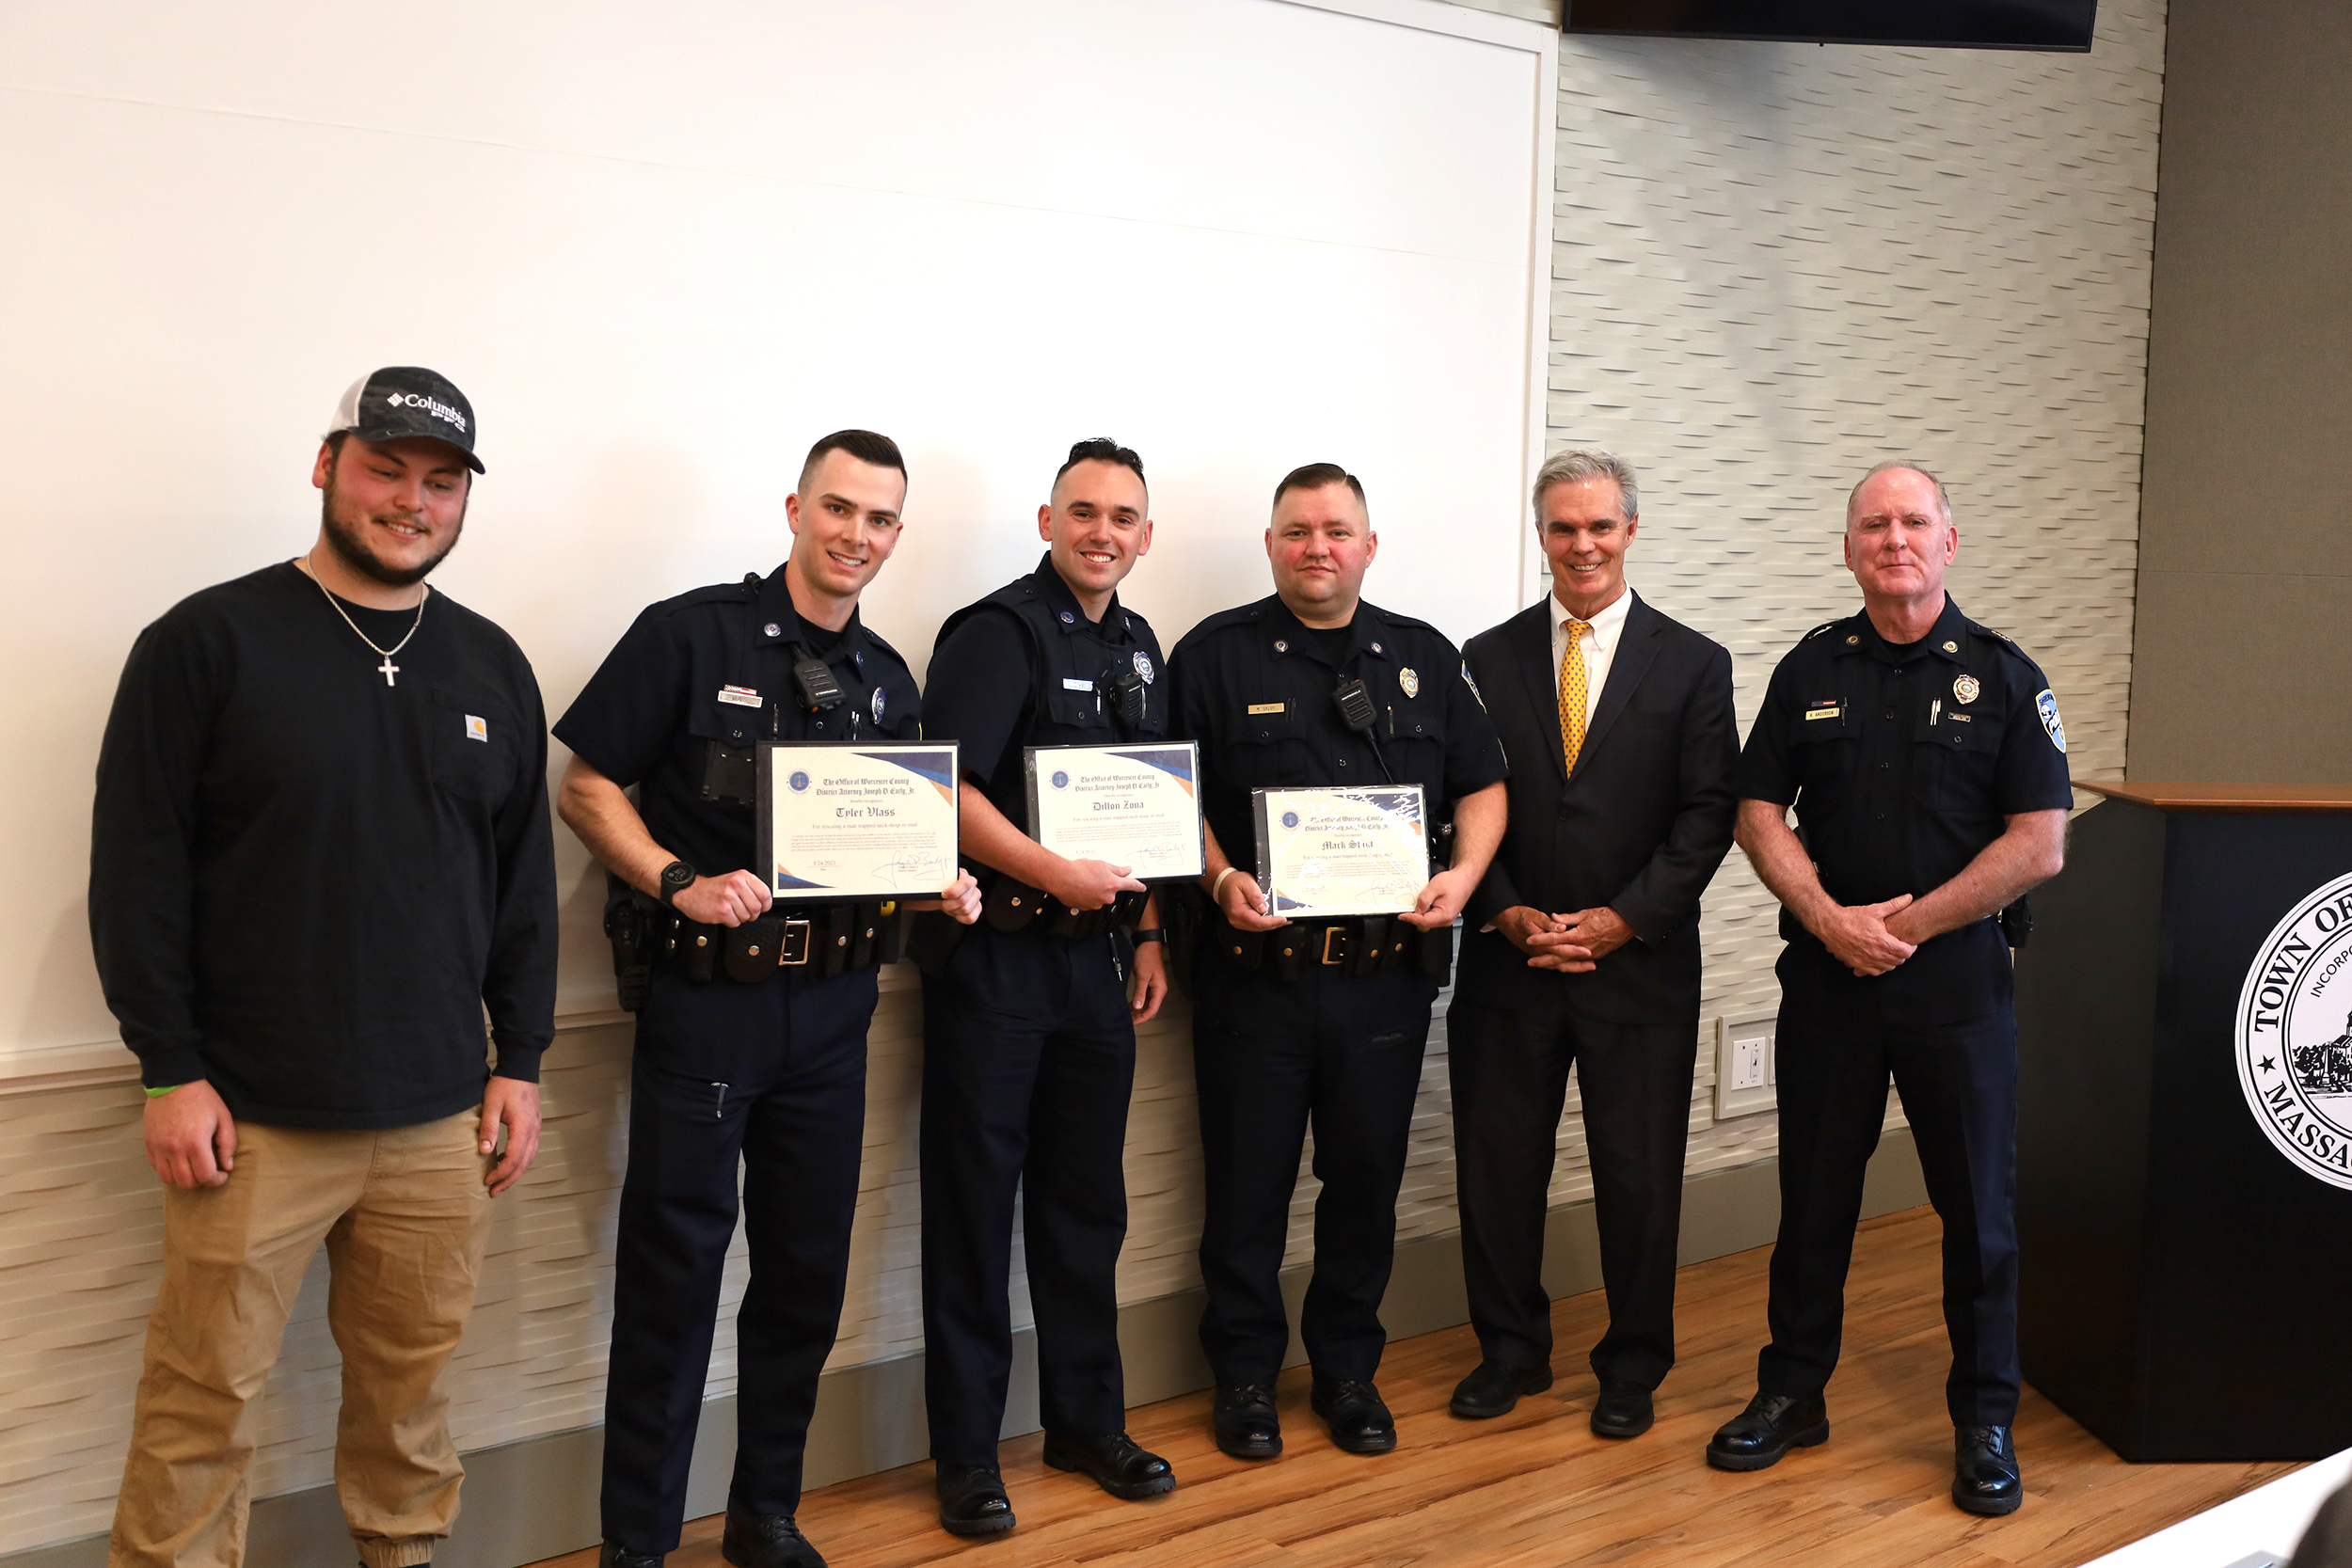 District attorney honors Shrewsbury police for life-saving rescue